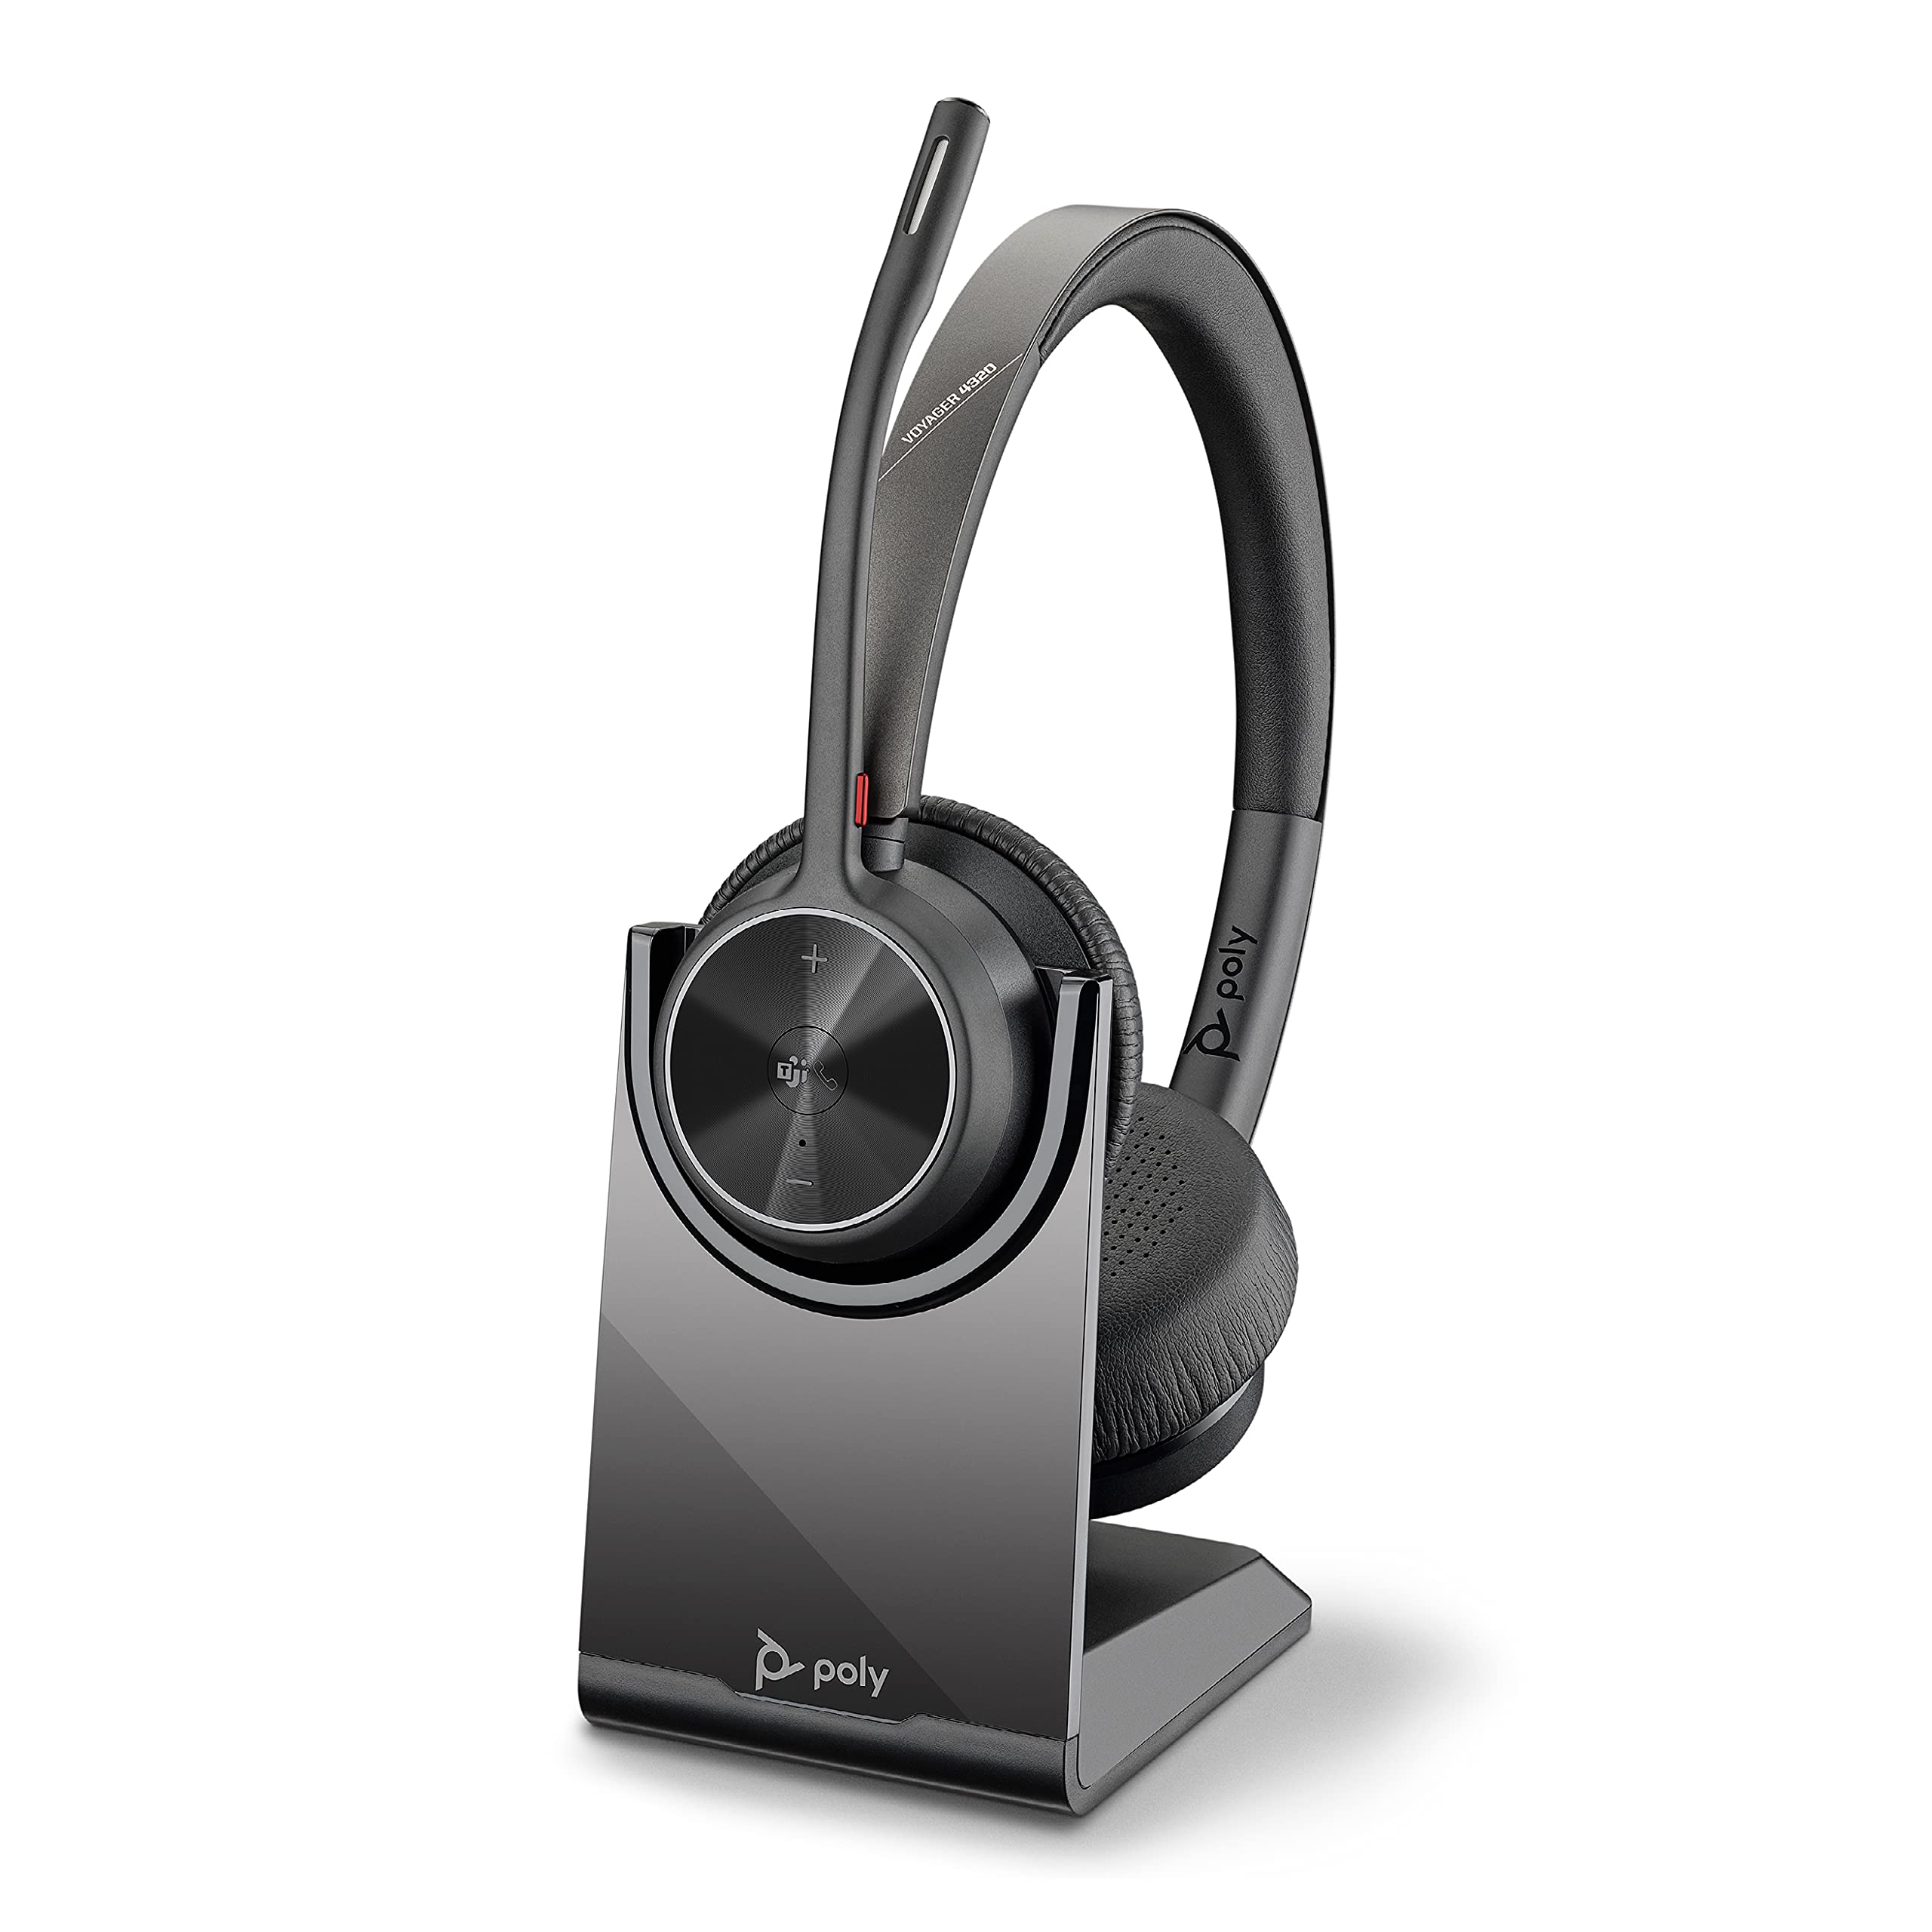 Poly - Voyager 4320 UC Wireless Headset + Charge Stand (Plantronics) - Headphones w/Mic - Connect to PC/Mac via USB-A Bluetooth Adapter, Cell Phone...